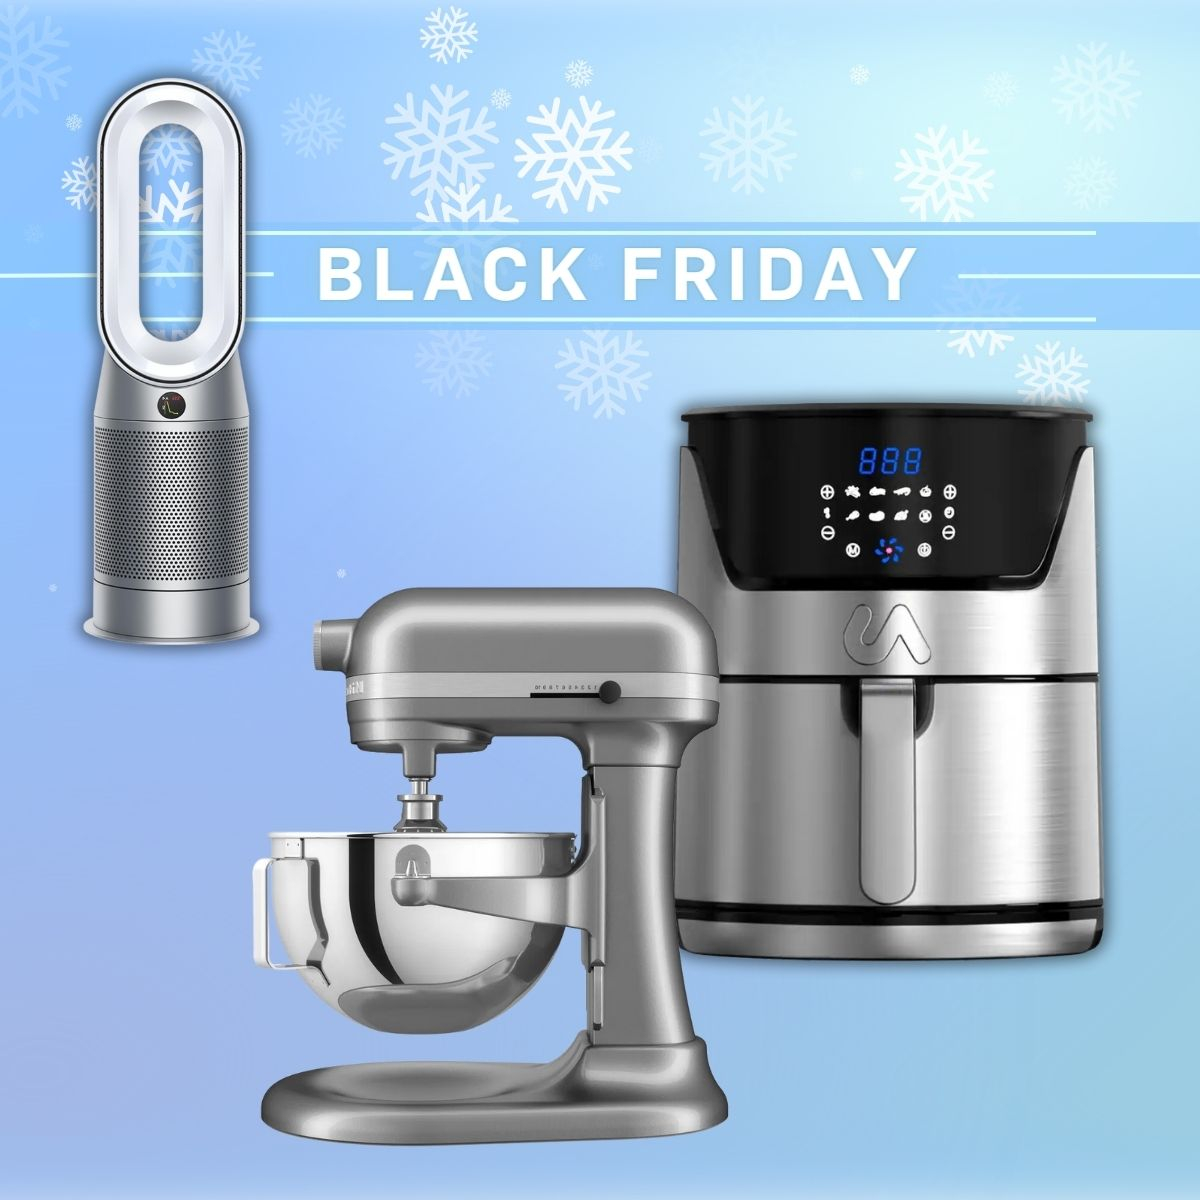 https://akns-images.eonline.com/eol_images/Entire_Site/20231021/rs_1200x1200-231121174449-Home_2023_Black_Friday_Deals_-_Thumbnail_1.jpg?fit=around%7C1200:1200&output-quality=90&crop=1200:1200;center,top